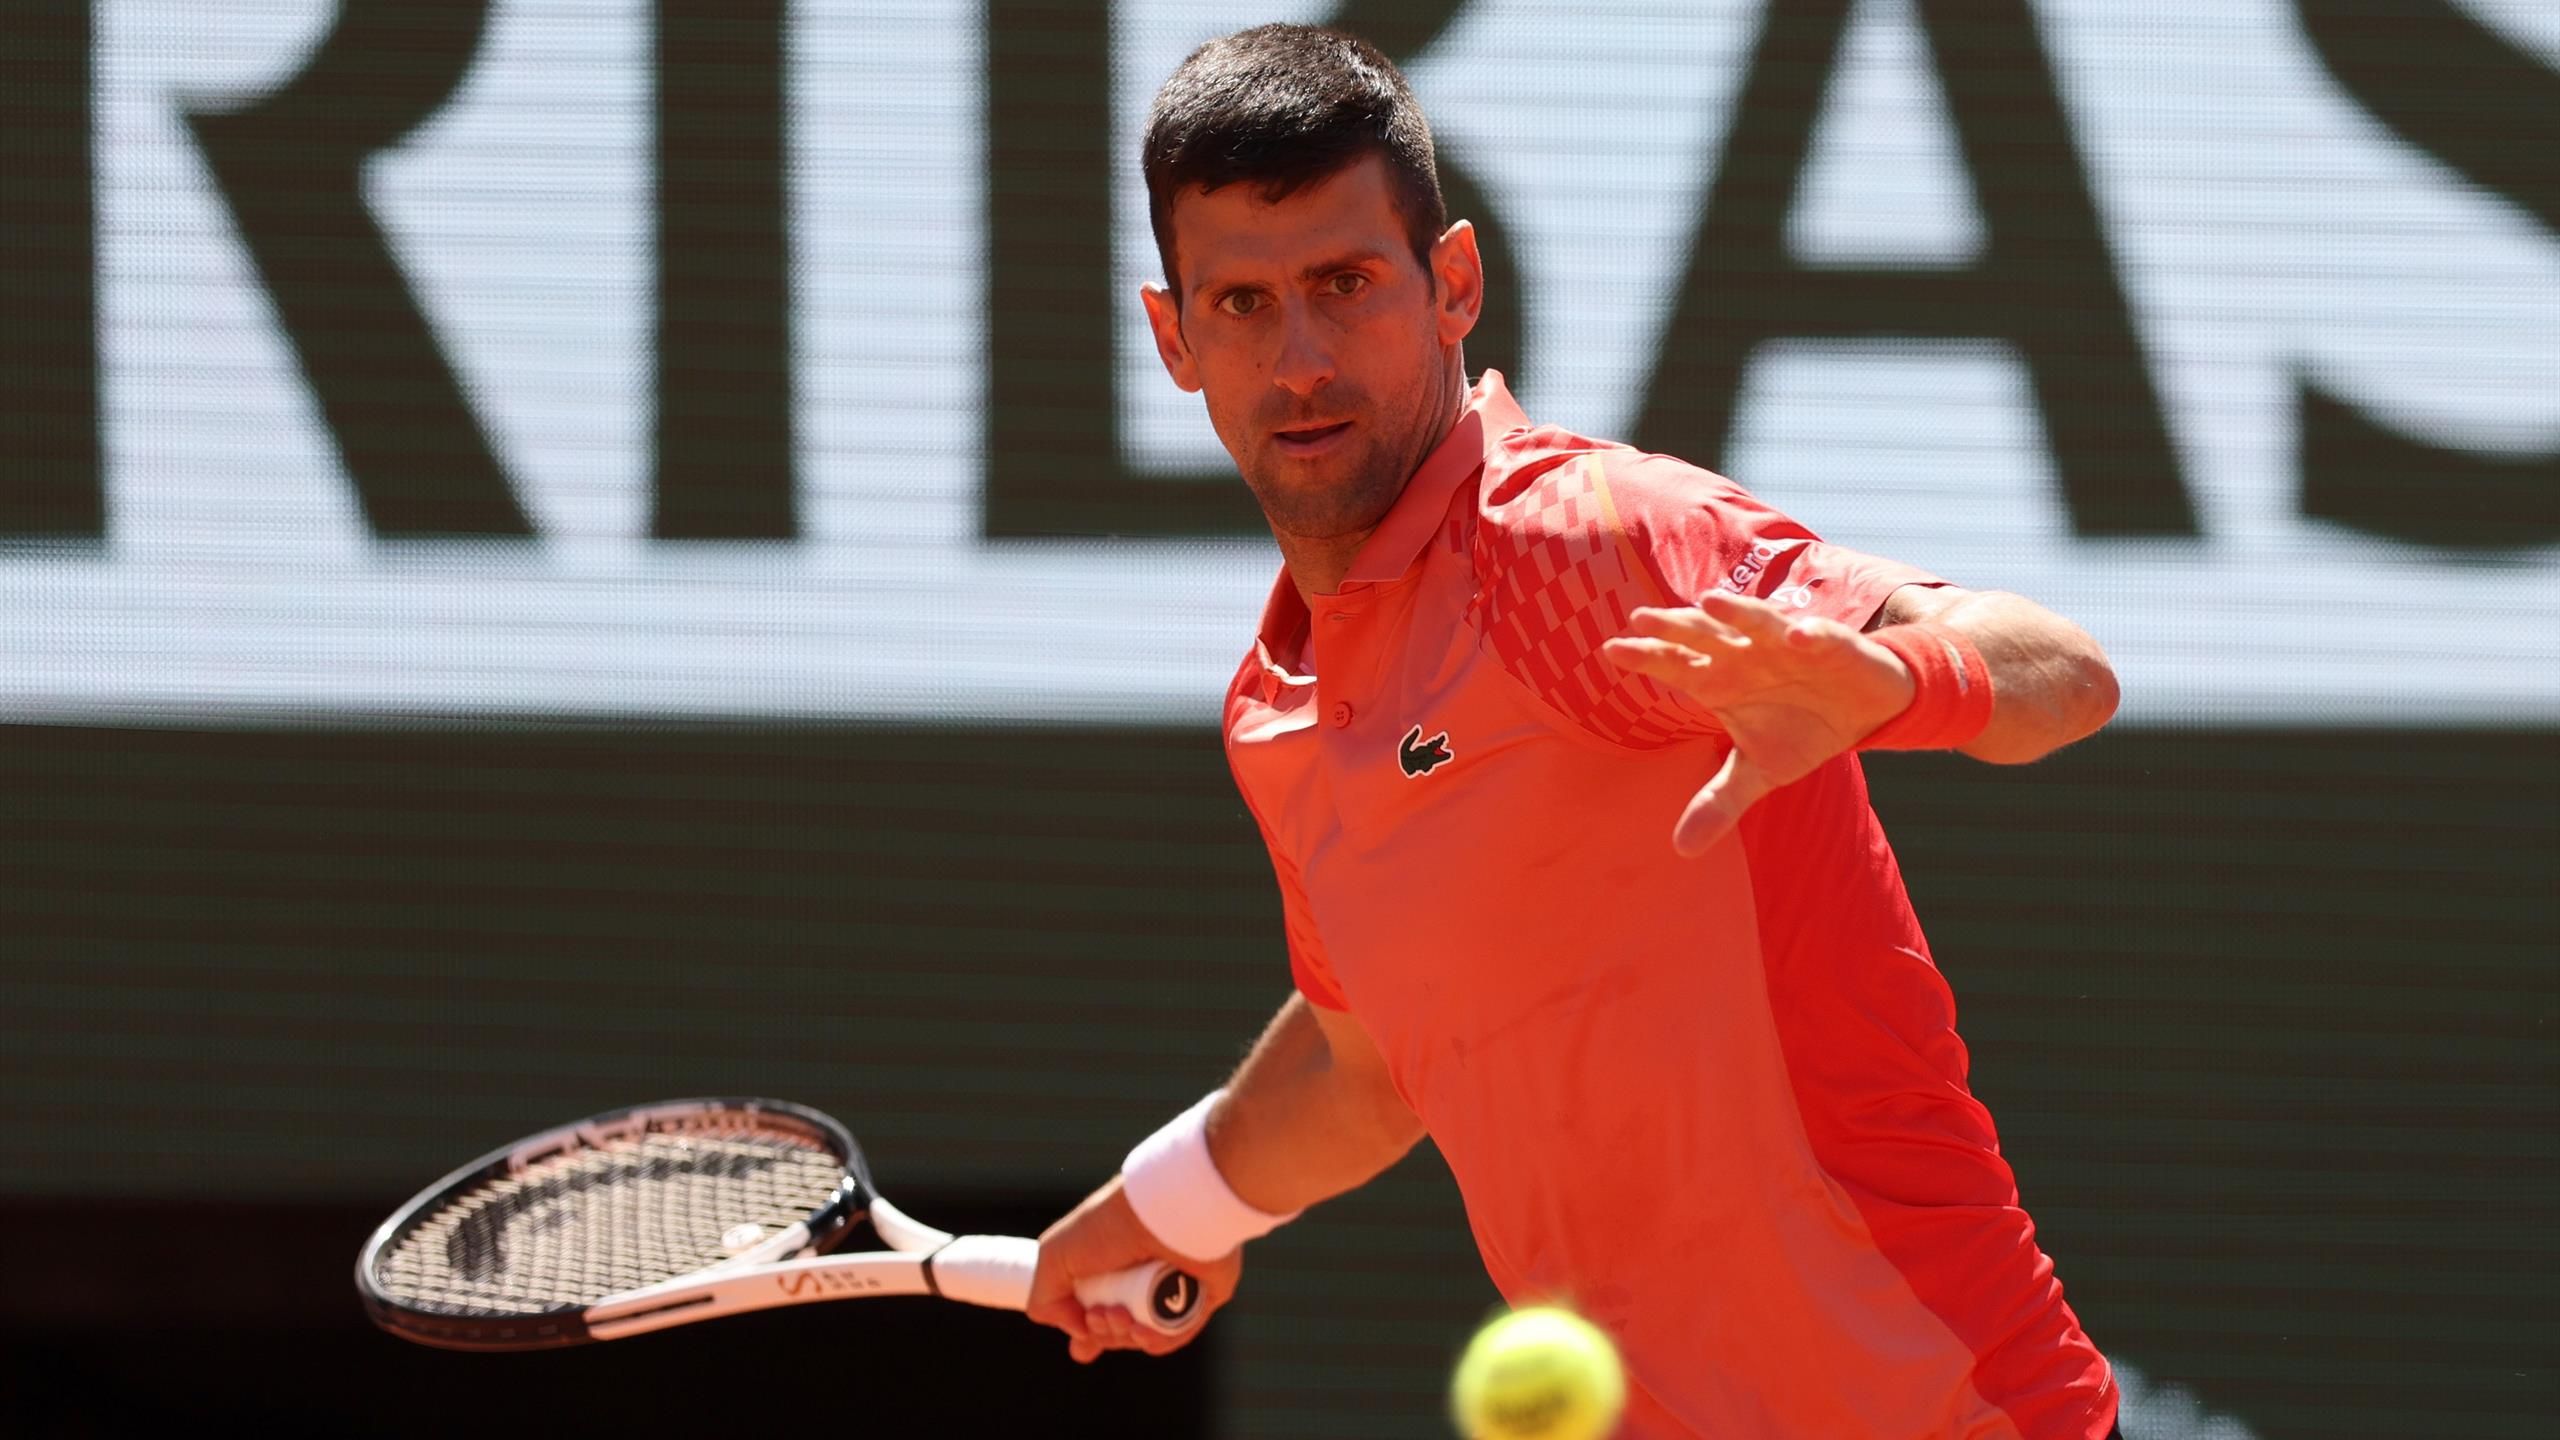 French Open Day 13 order of play and schedule - How to watch Carlos Alcaraz v Novak Djokovic in mens semi-finals